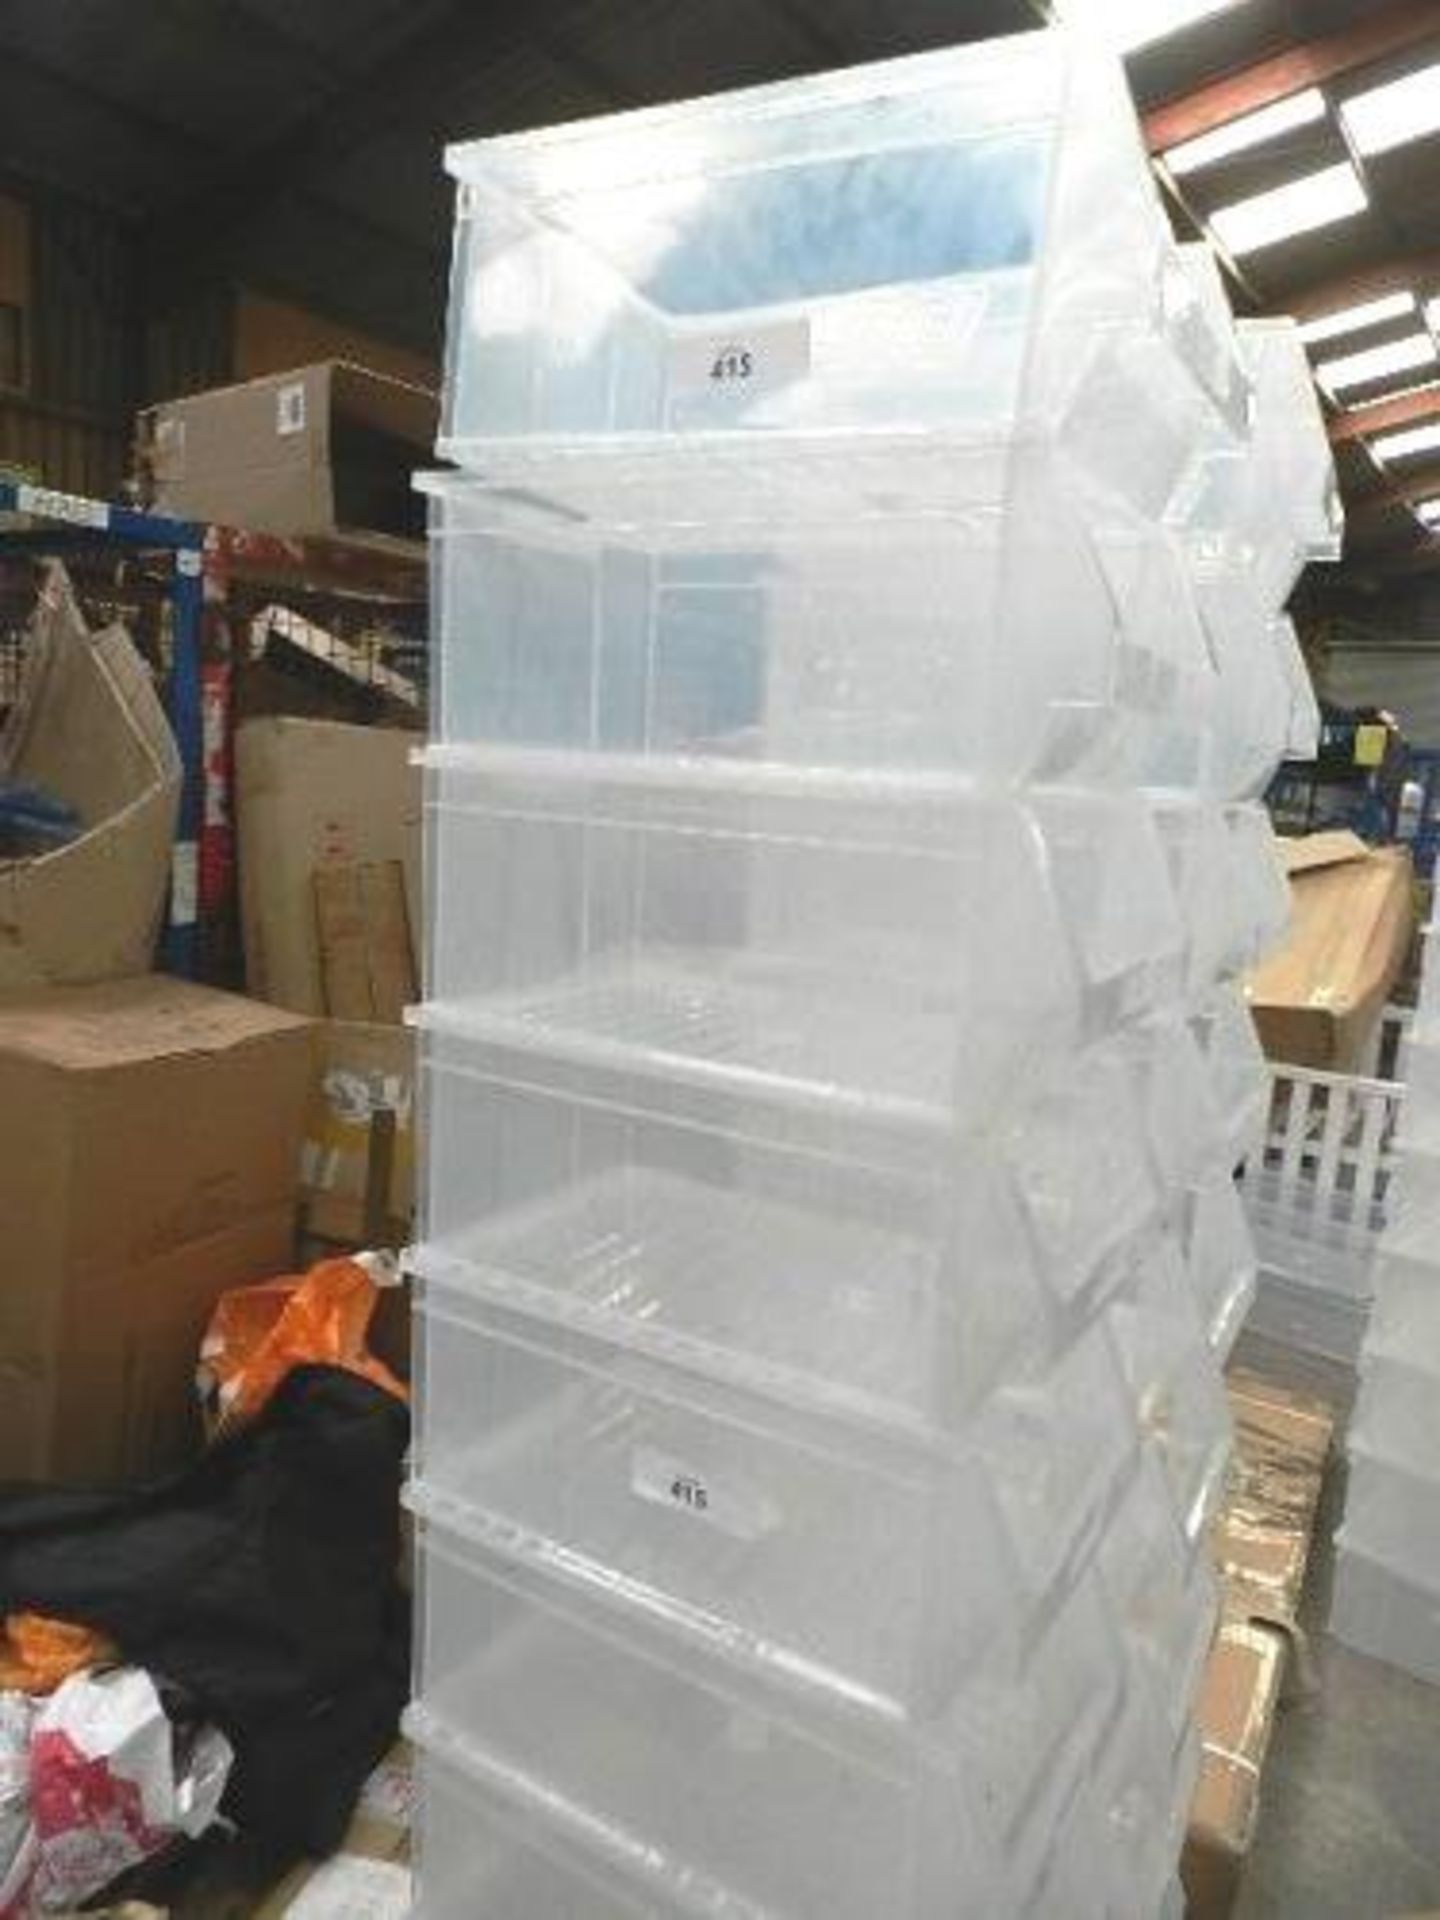 10 x Tayg opaque plastic storage boxed, Gavela 58, size 30 x 20 x 50cm approximately, RRP £35.00